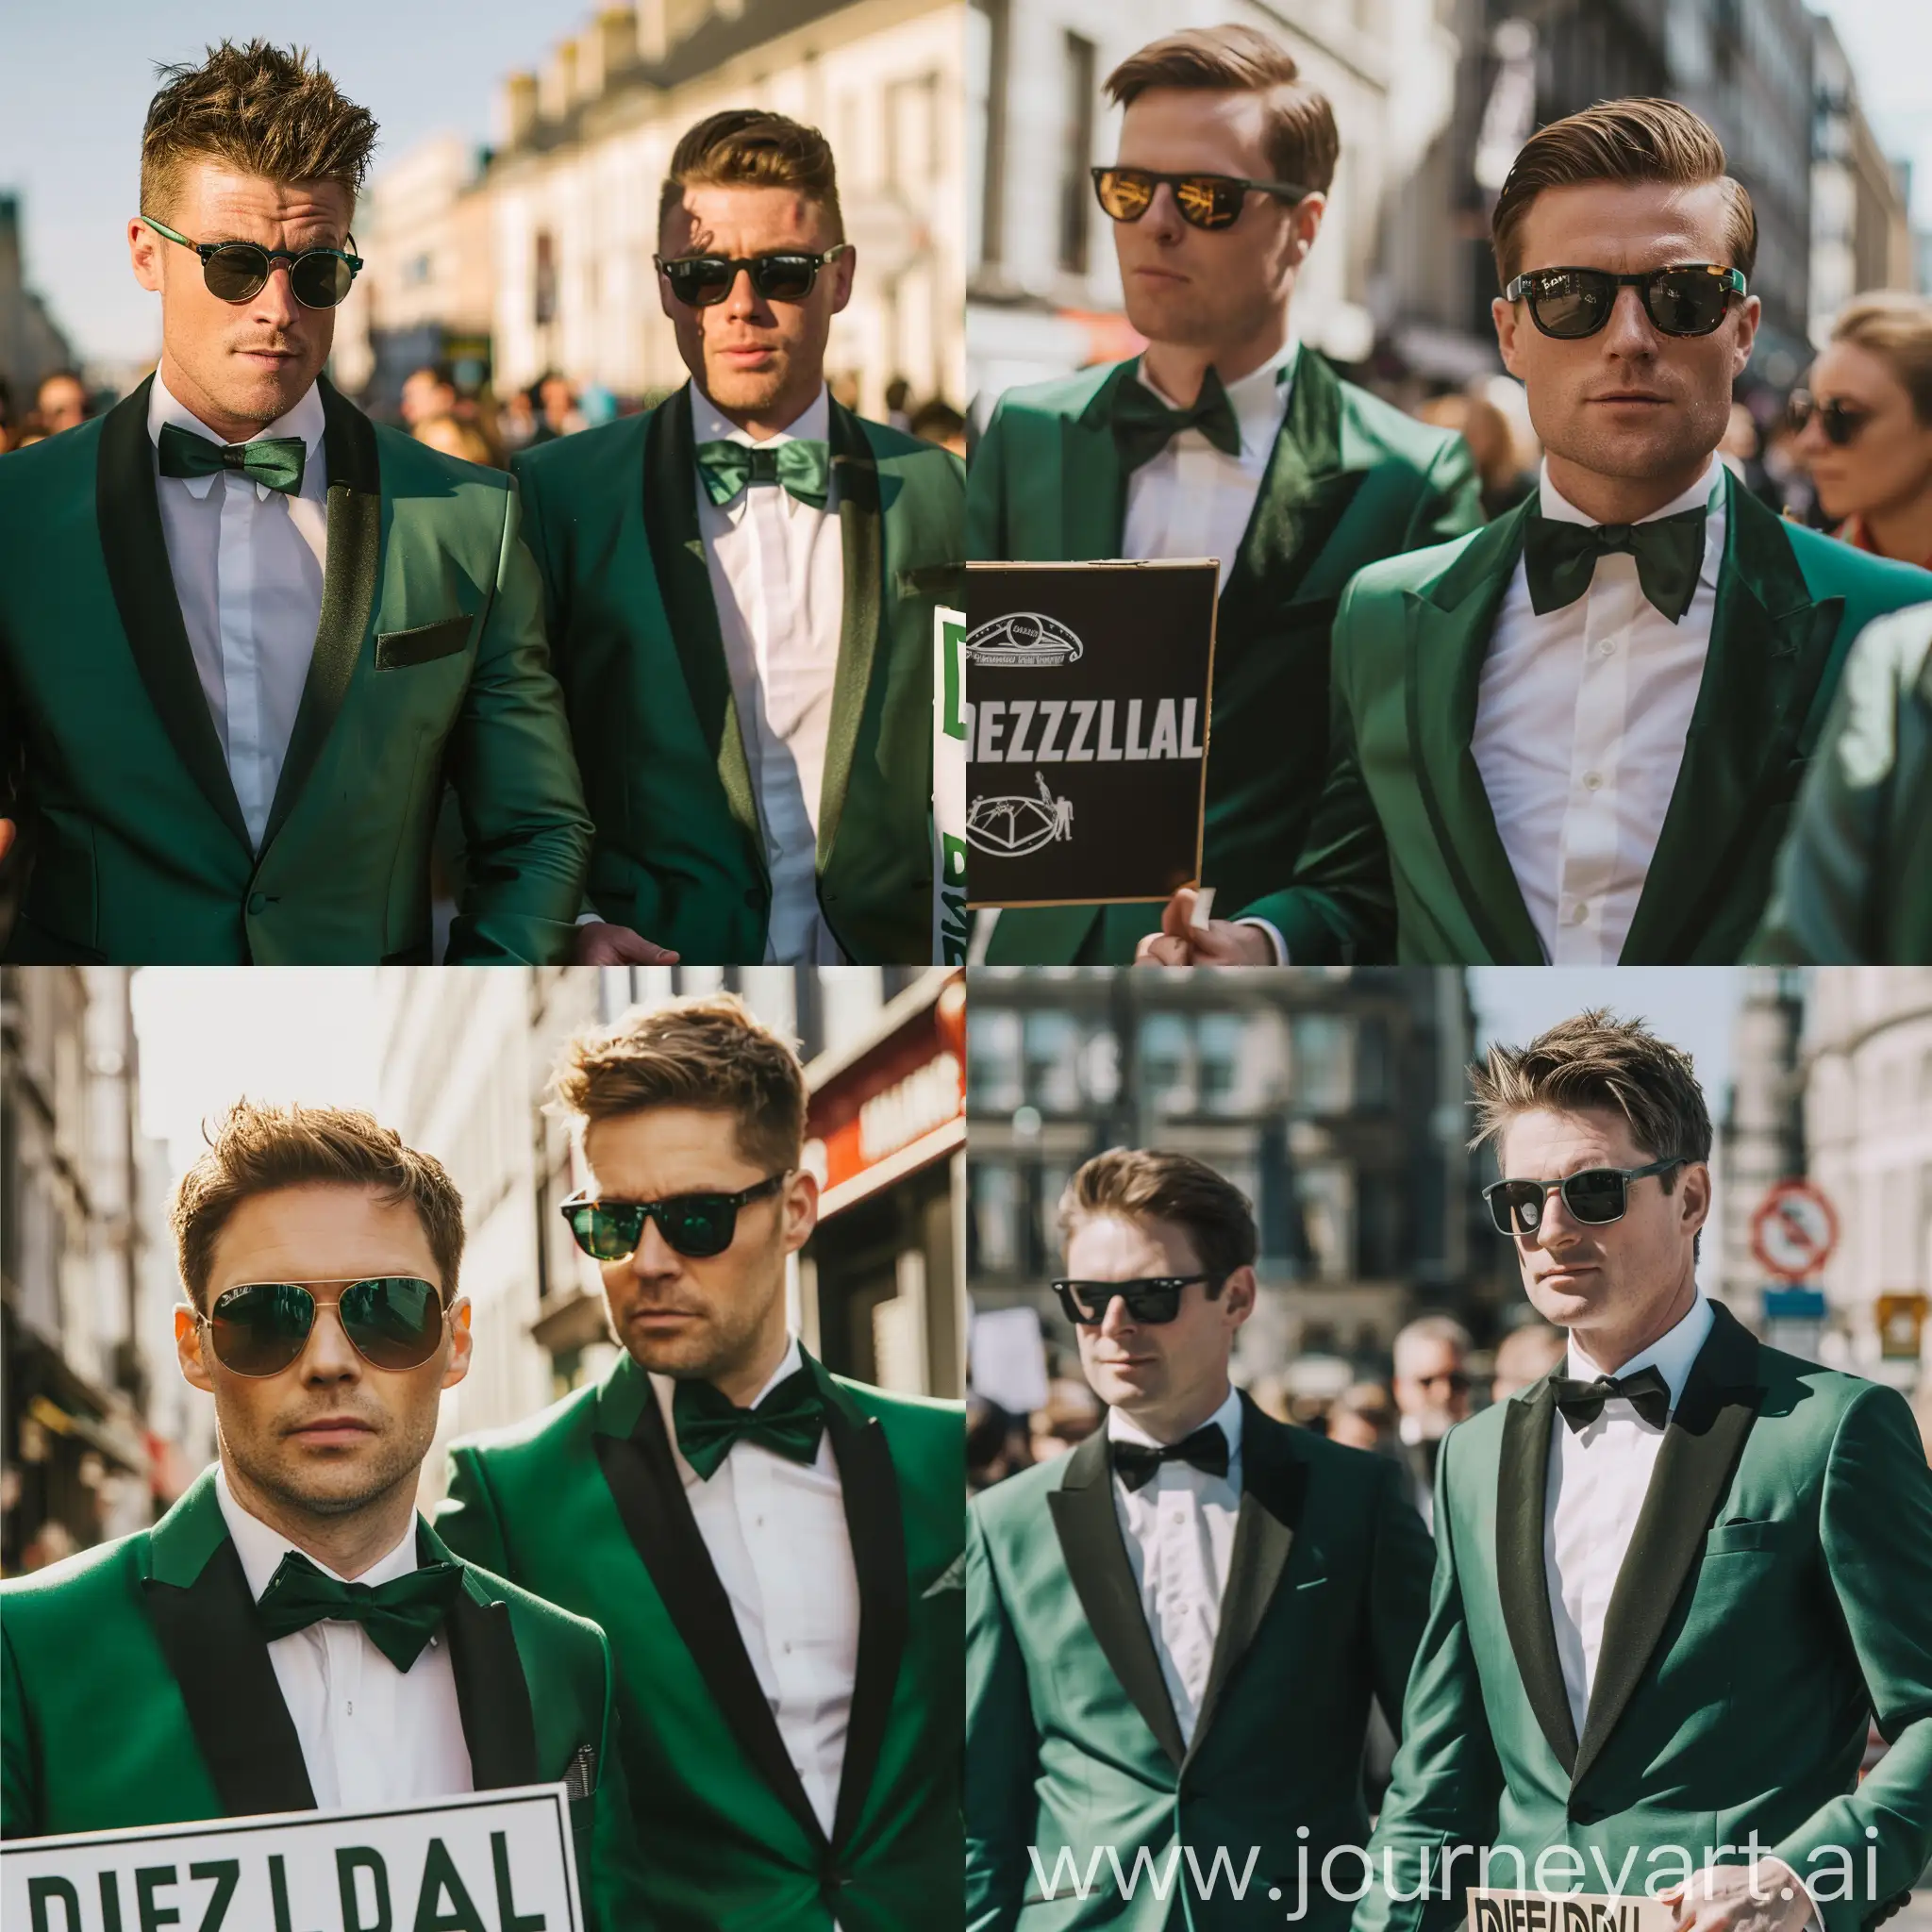 Two white men with brown hair and sunglasses. They are wearing green tuxedo's. Walking trough the city of  dublin. One of them is carrying a sign that has the words "Diezeldal" on it.